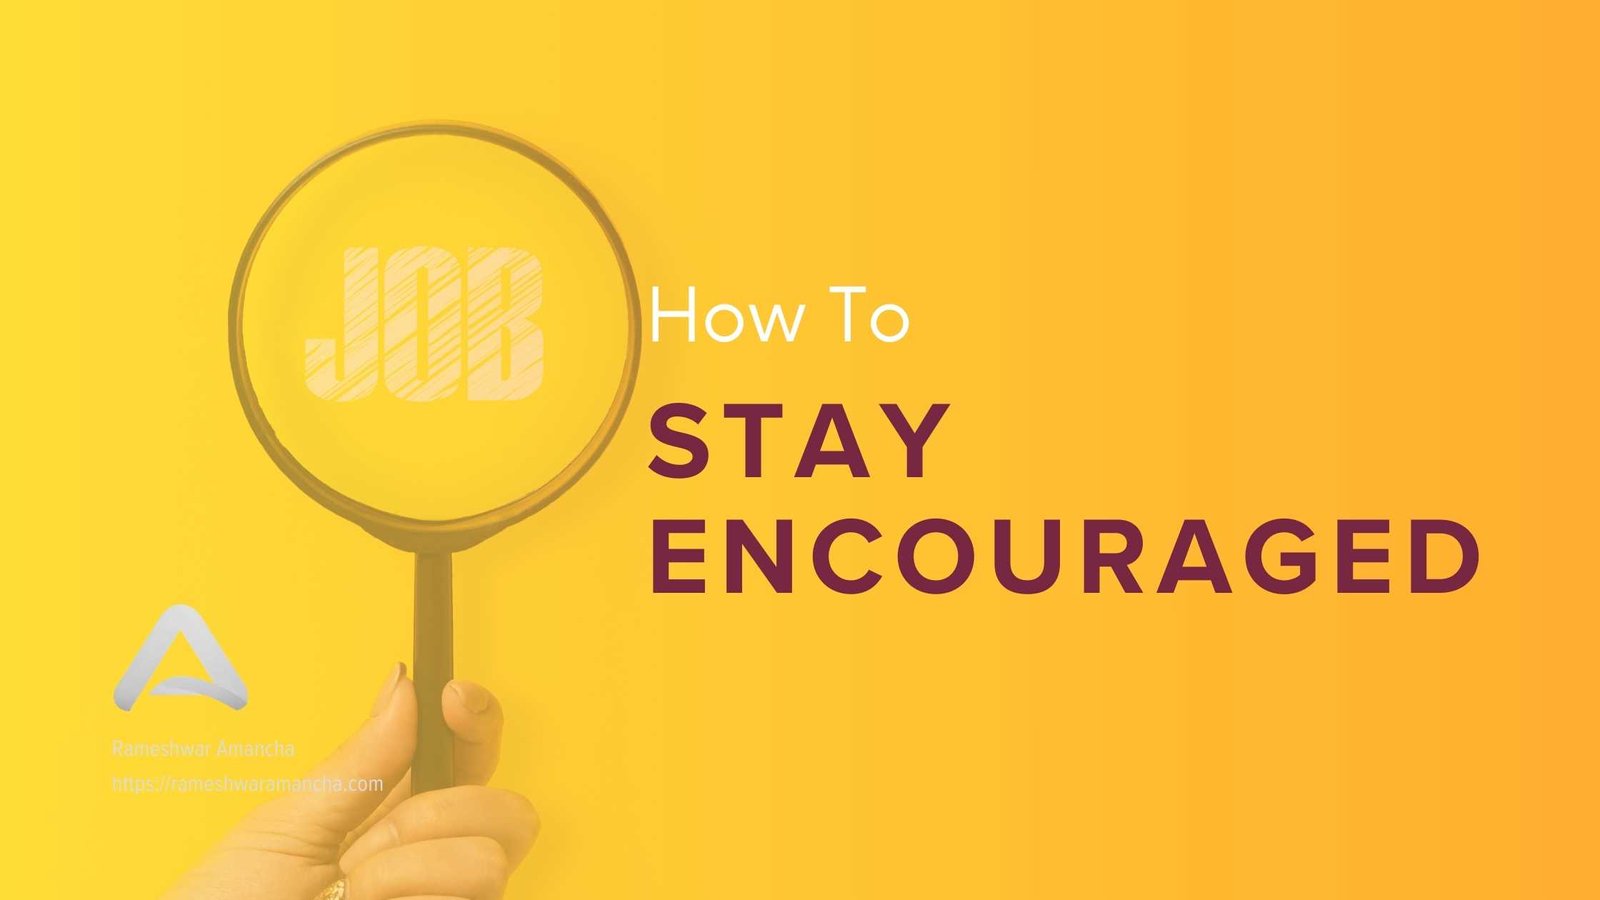 How to Stay Encouraged